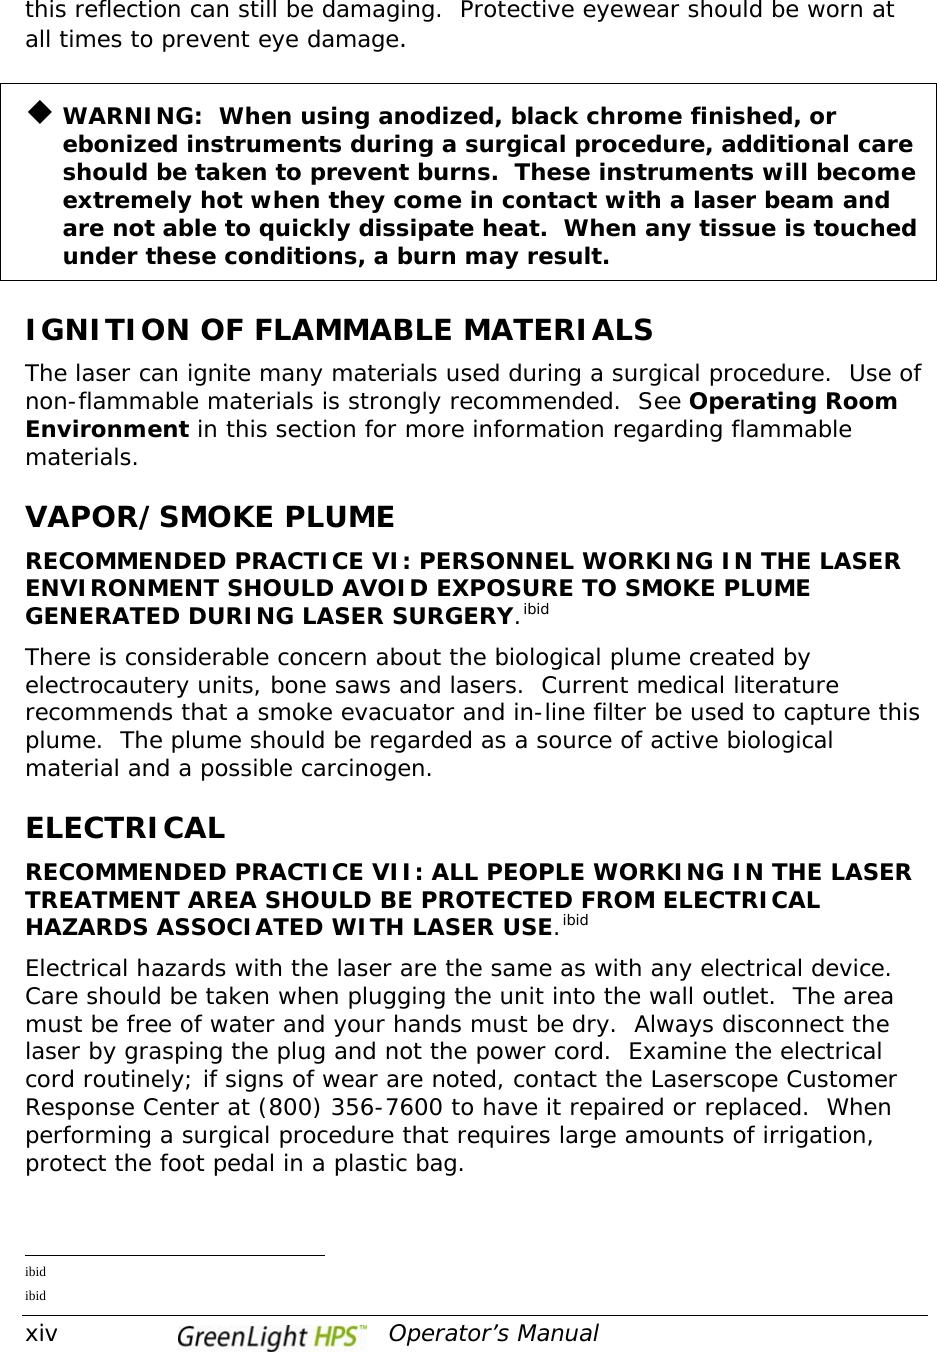  xiv                                         Operator’s Manual this reflection can still be damaging.  Protective eyewear should be worn at all times to prevent eye damage.  ¡ WARNING:  When using anodized, black chrome finished, or ebonized instruments during a surgical procedure, additional care should be taken to prevent burns.  These instruments will become extremely hot when they come in contact with a laser beam and are not able to quickly dissipate heat.  When any tissue is touched under these conditions, a burn may result.  IGNITION OF FLAMMABLE MATERIALS The laser can ignite many materials used during a surgical procedure.  Use of non-flammable materials is strongly recommended.  See Operating Room Environment in this section for more information regarding flammable materials.  VAPOR/SMOKE PLUME RECOMMENDED PRACTICE VI: PERSONNEL WORKING IN THE LASER ENVIRONMENT SHOULD AVOID EXPOSURE TO SMOKE PLUME GENERATED DURING LASER SURGERY.ibidThere is considerable concern about the biological plume created by electrocautery units, bone saws and lasers.  Current medical literature recommends that a smoke evacuator and in-line filter be used to capture this plume.  The plume should be regarded as a source of active biological material and a possible carcinogen.  ELECTRICAL RECOMMENDED PRACTICE VII: ALL PEOPLE WORKING IN THE LASER TREATMENT AREA SHOULD BE PROTECTED FROM ELECTRICAL HAZARDS ASSOCIATED WITH LASER USE.ibidElectrical hazards with the laser are the same as with any electrical device.  Care should be taken when plugging the unit into the wall outlet.  The area must be free of water and your hands must be dry.  Always disconnect the laser by grasping the plug and not the power cord.  Examine the electrical cord routinely; if signs of wear are noted, contact the Laserscope Customer Response Center at (800) 356-7600 to have it repaired or replaced.  When performing a surgical procedure that requires large amounts of irrigation, protect the foot pedal in a plastic bag.                                                  ibid  ibid  